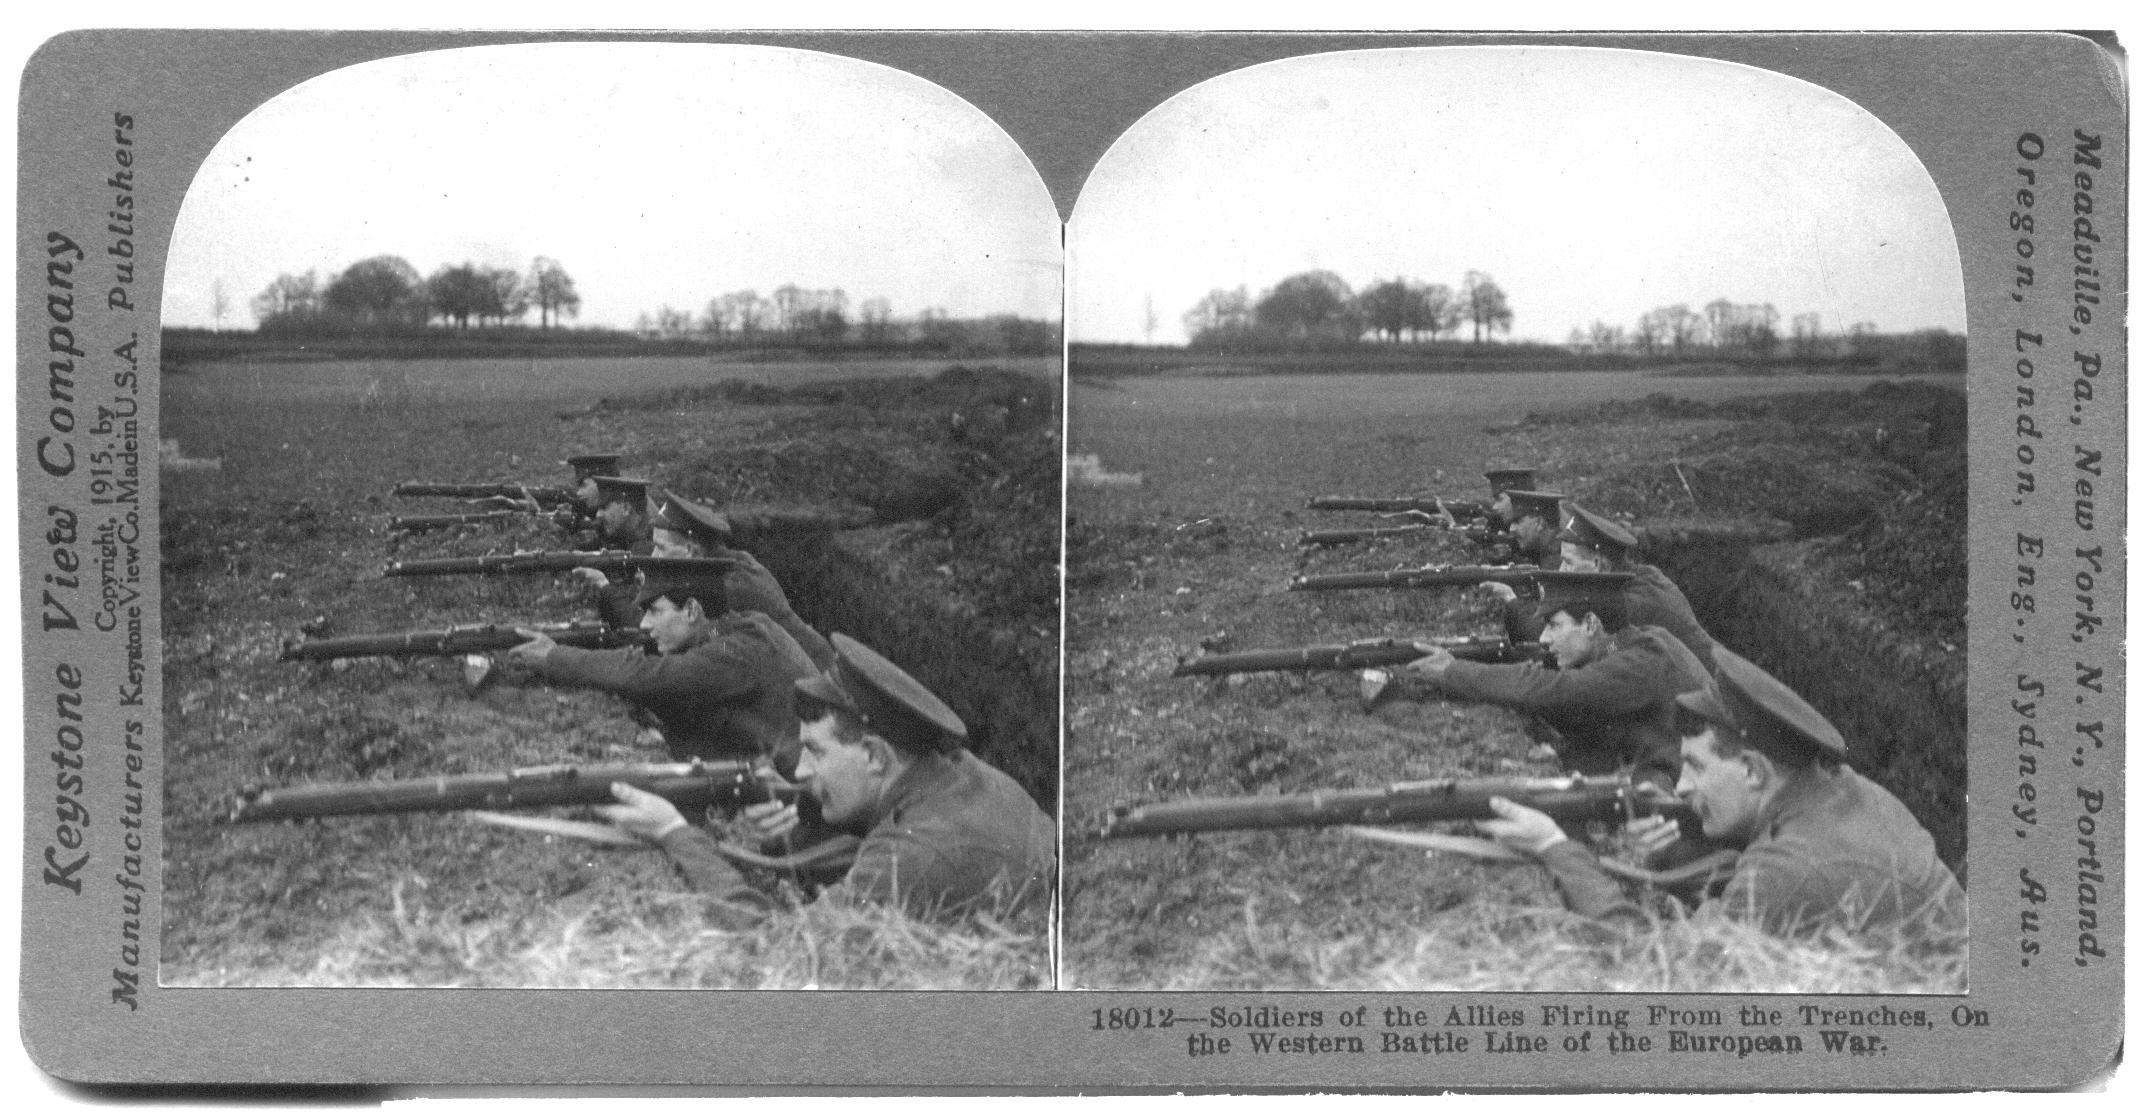 Soldiers of the Allies Firing from the Trenches, On the Western Battle Line of the European War